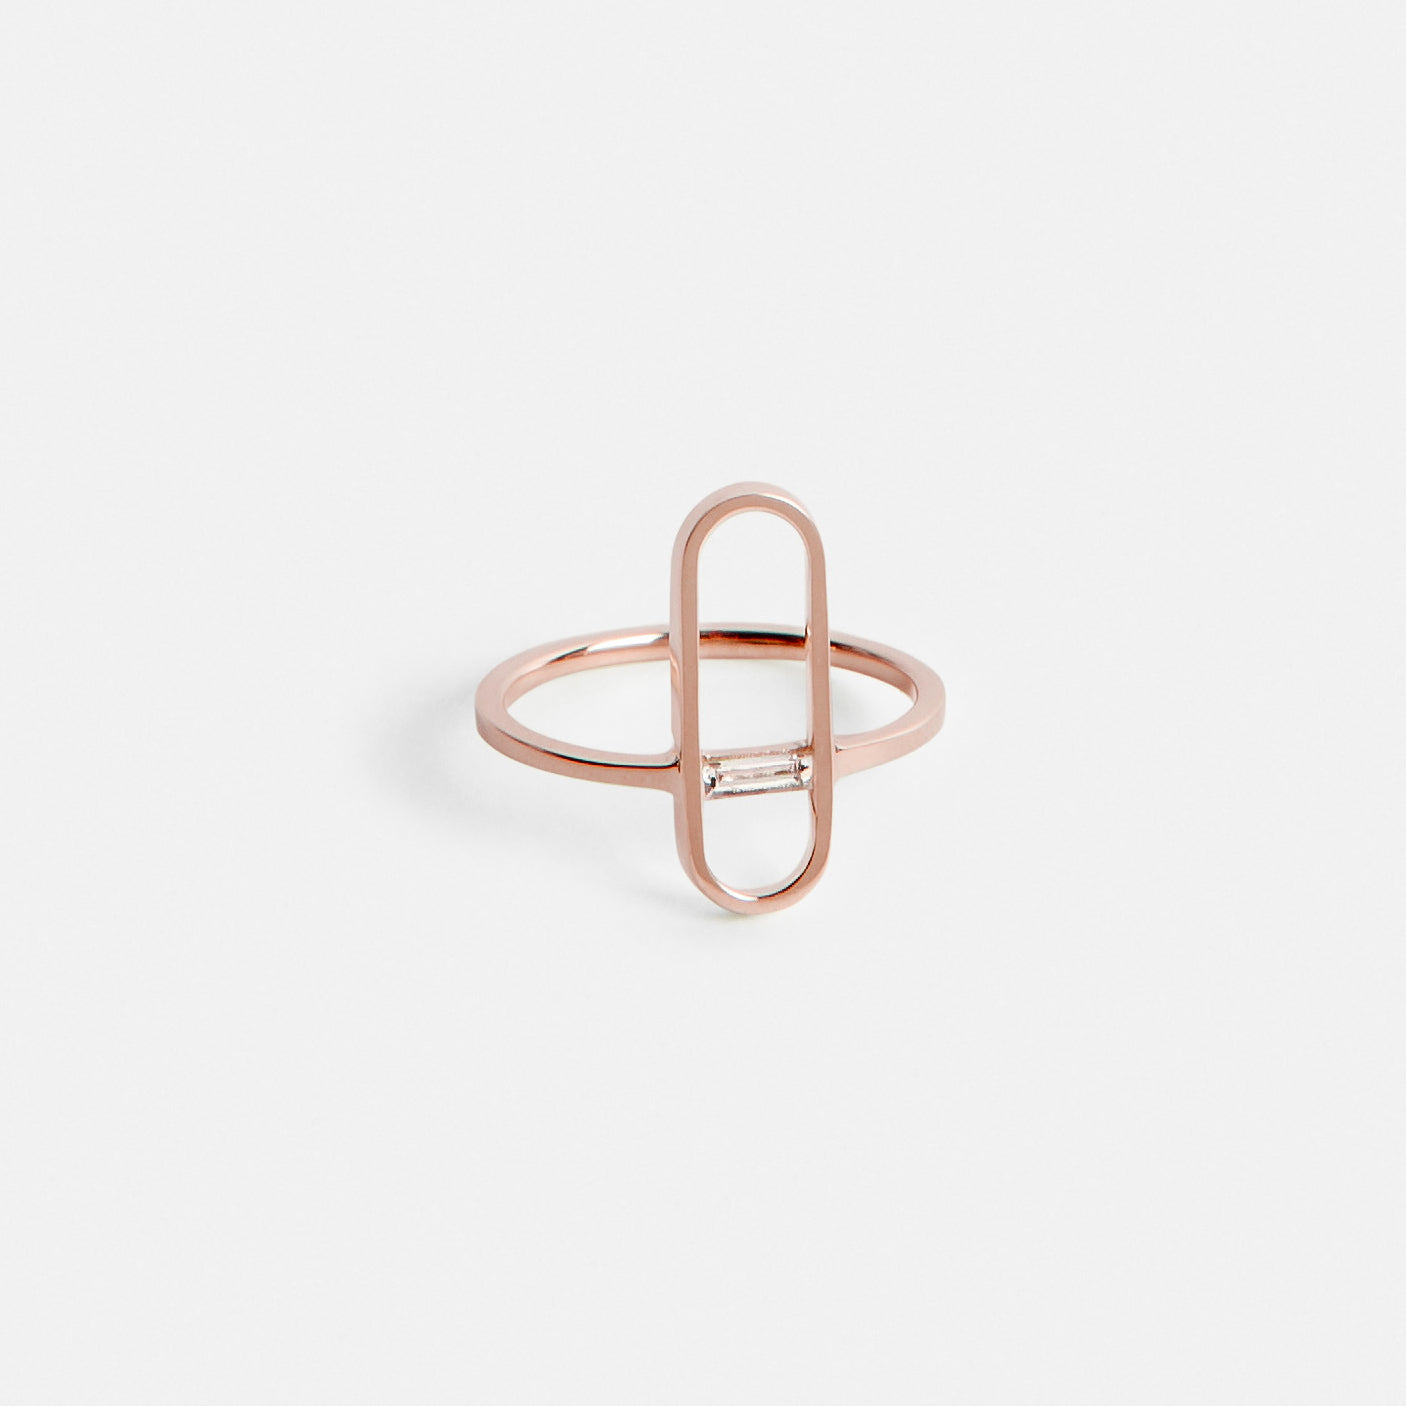 Ranga Thin Ring in 14k Rose Gold set with White Diamond by SHW Fine Jewelry